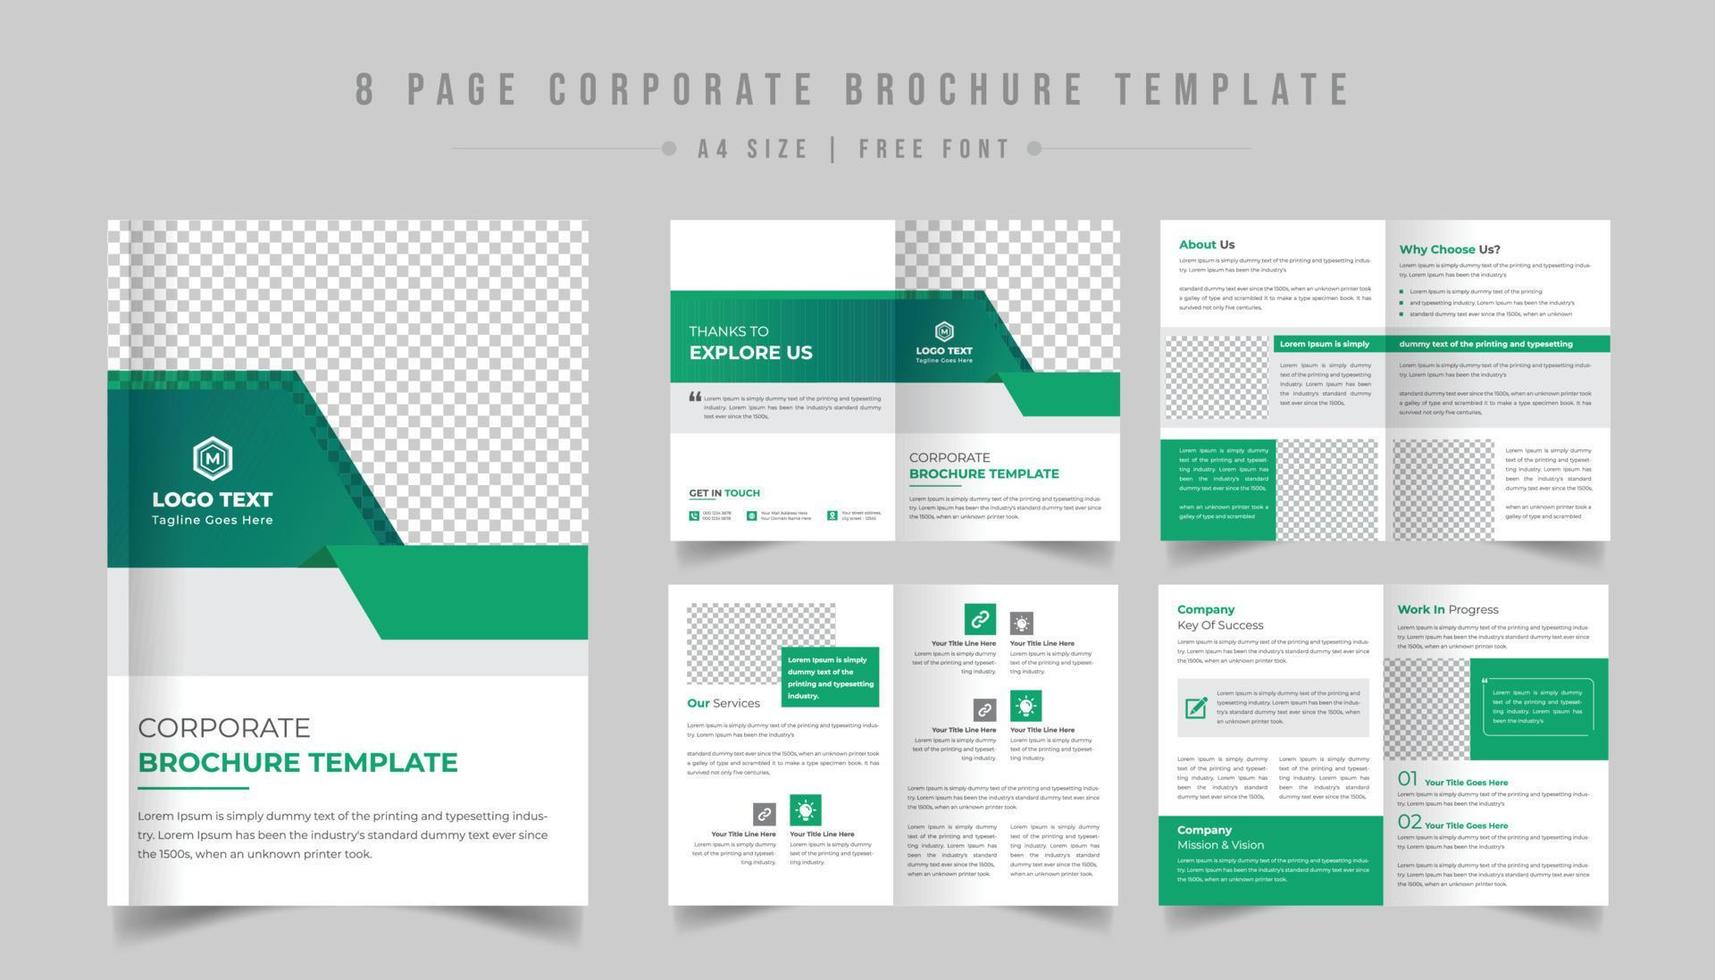 Company brochure template design, 8-page corporate brochure layout, minimal business brochure template design, Proposal project, booklet, company profile, Project proposal, corporate, catalog, annual vector